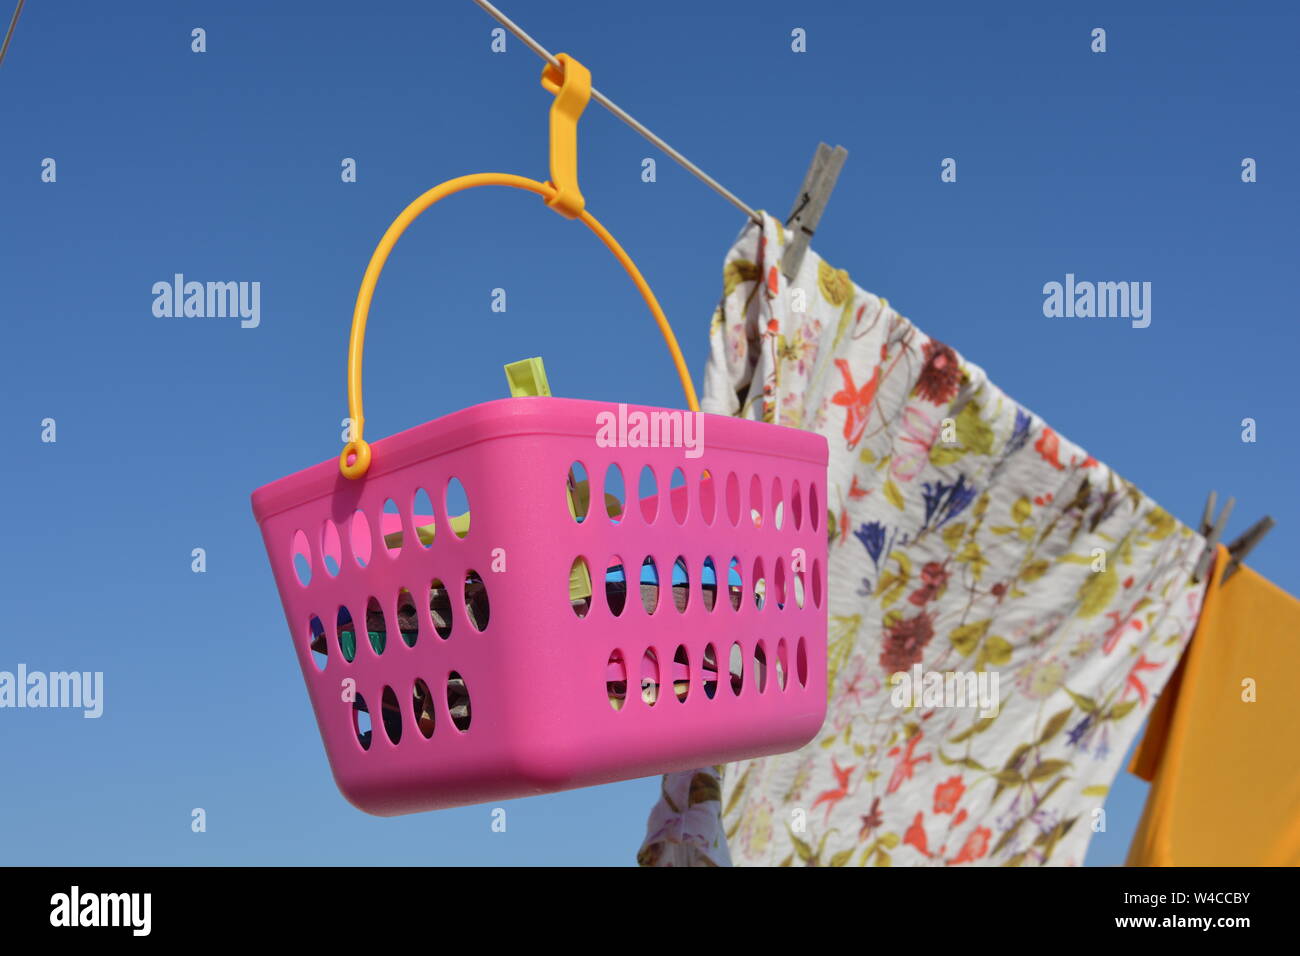 laundry hanging out to dry outdoors on a hot sunny, day. Close up, detail of pink peg basket, shirts and clothes pegs against blue sky background pegh Stock Photo